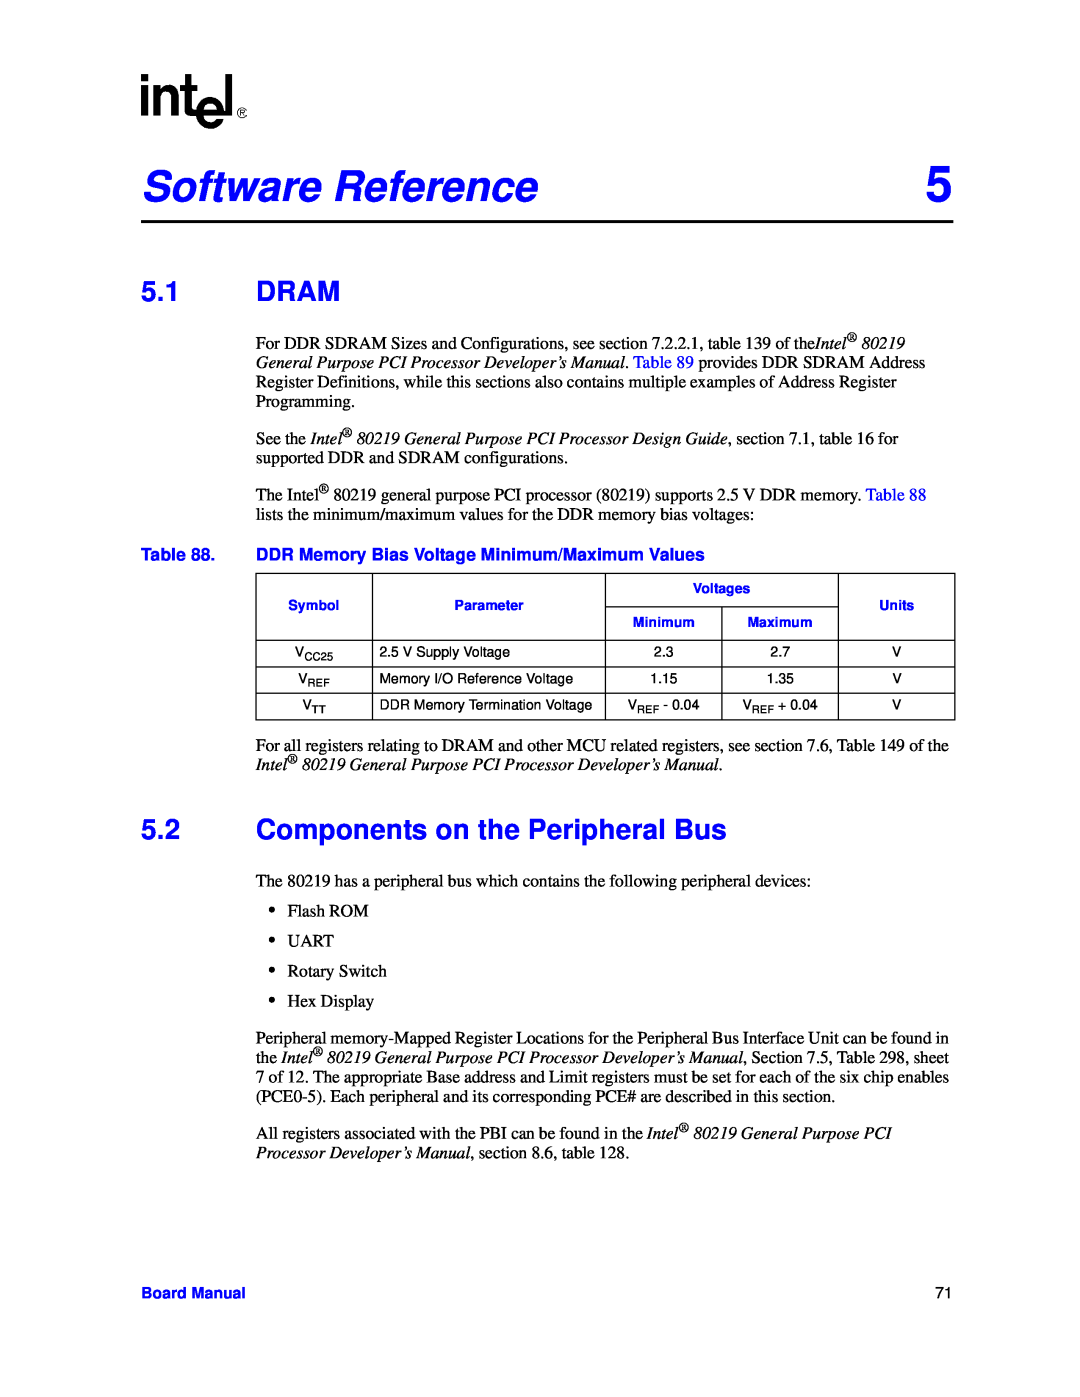 Intel IQ80219 Software Reference, Dram, Components on the Peripheral Bus, DDR Memory Bias Voltage Minimum/Maximum Values 